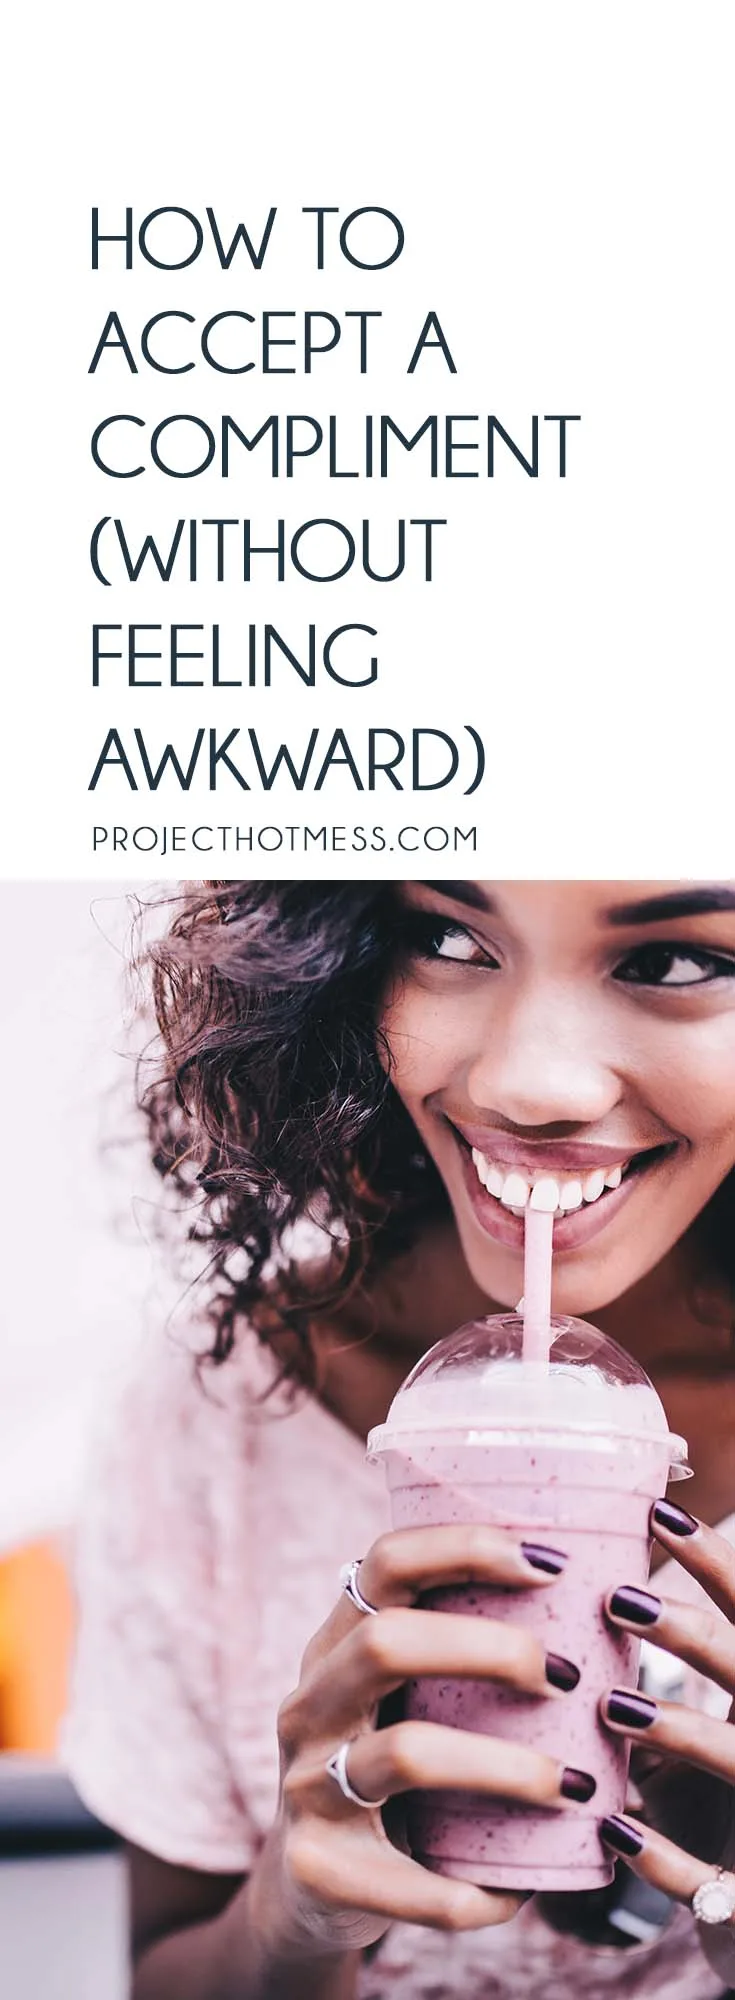 We all love receiving compliments... until they make us feel awkward and uncomfortable. So why not learn how to accept a compliment with genuine gratitude? Here's how you can start to accept compliments that are given to you without feeling awkward.